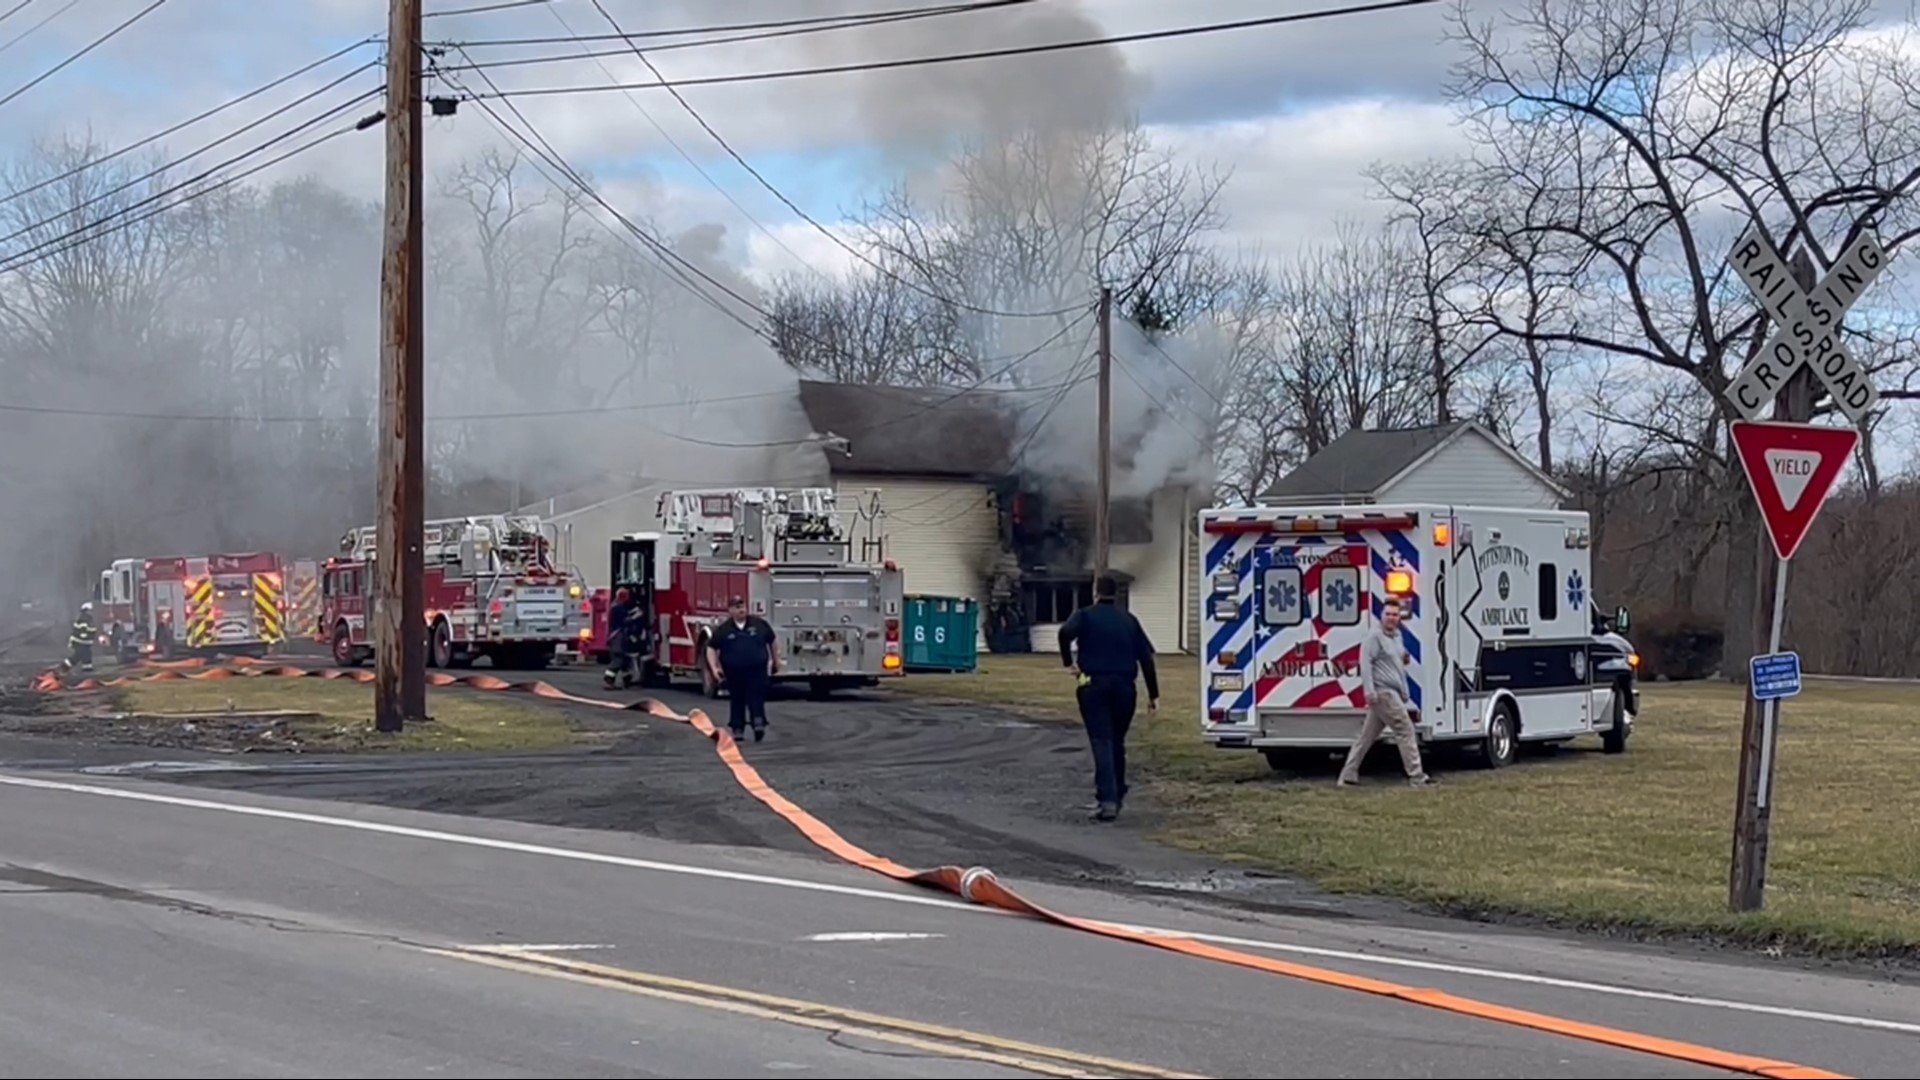 Flames broke out shortly before 10 a.m. Saturday morning along River Road in Jenkins Township.